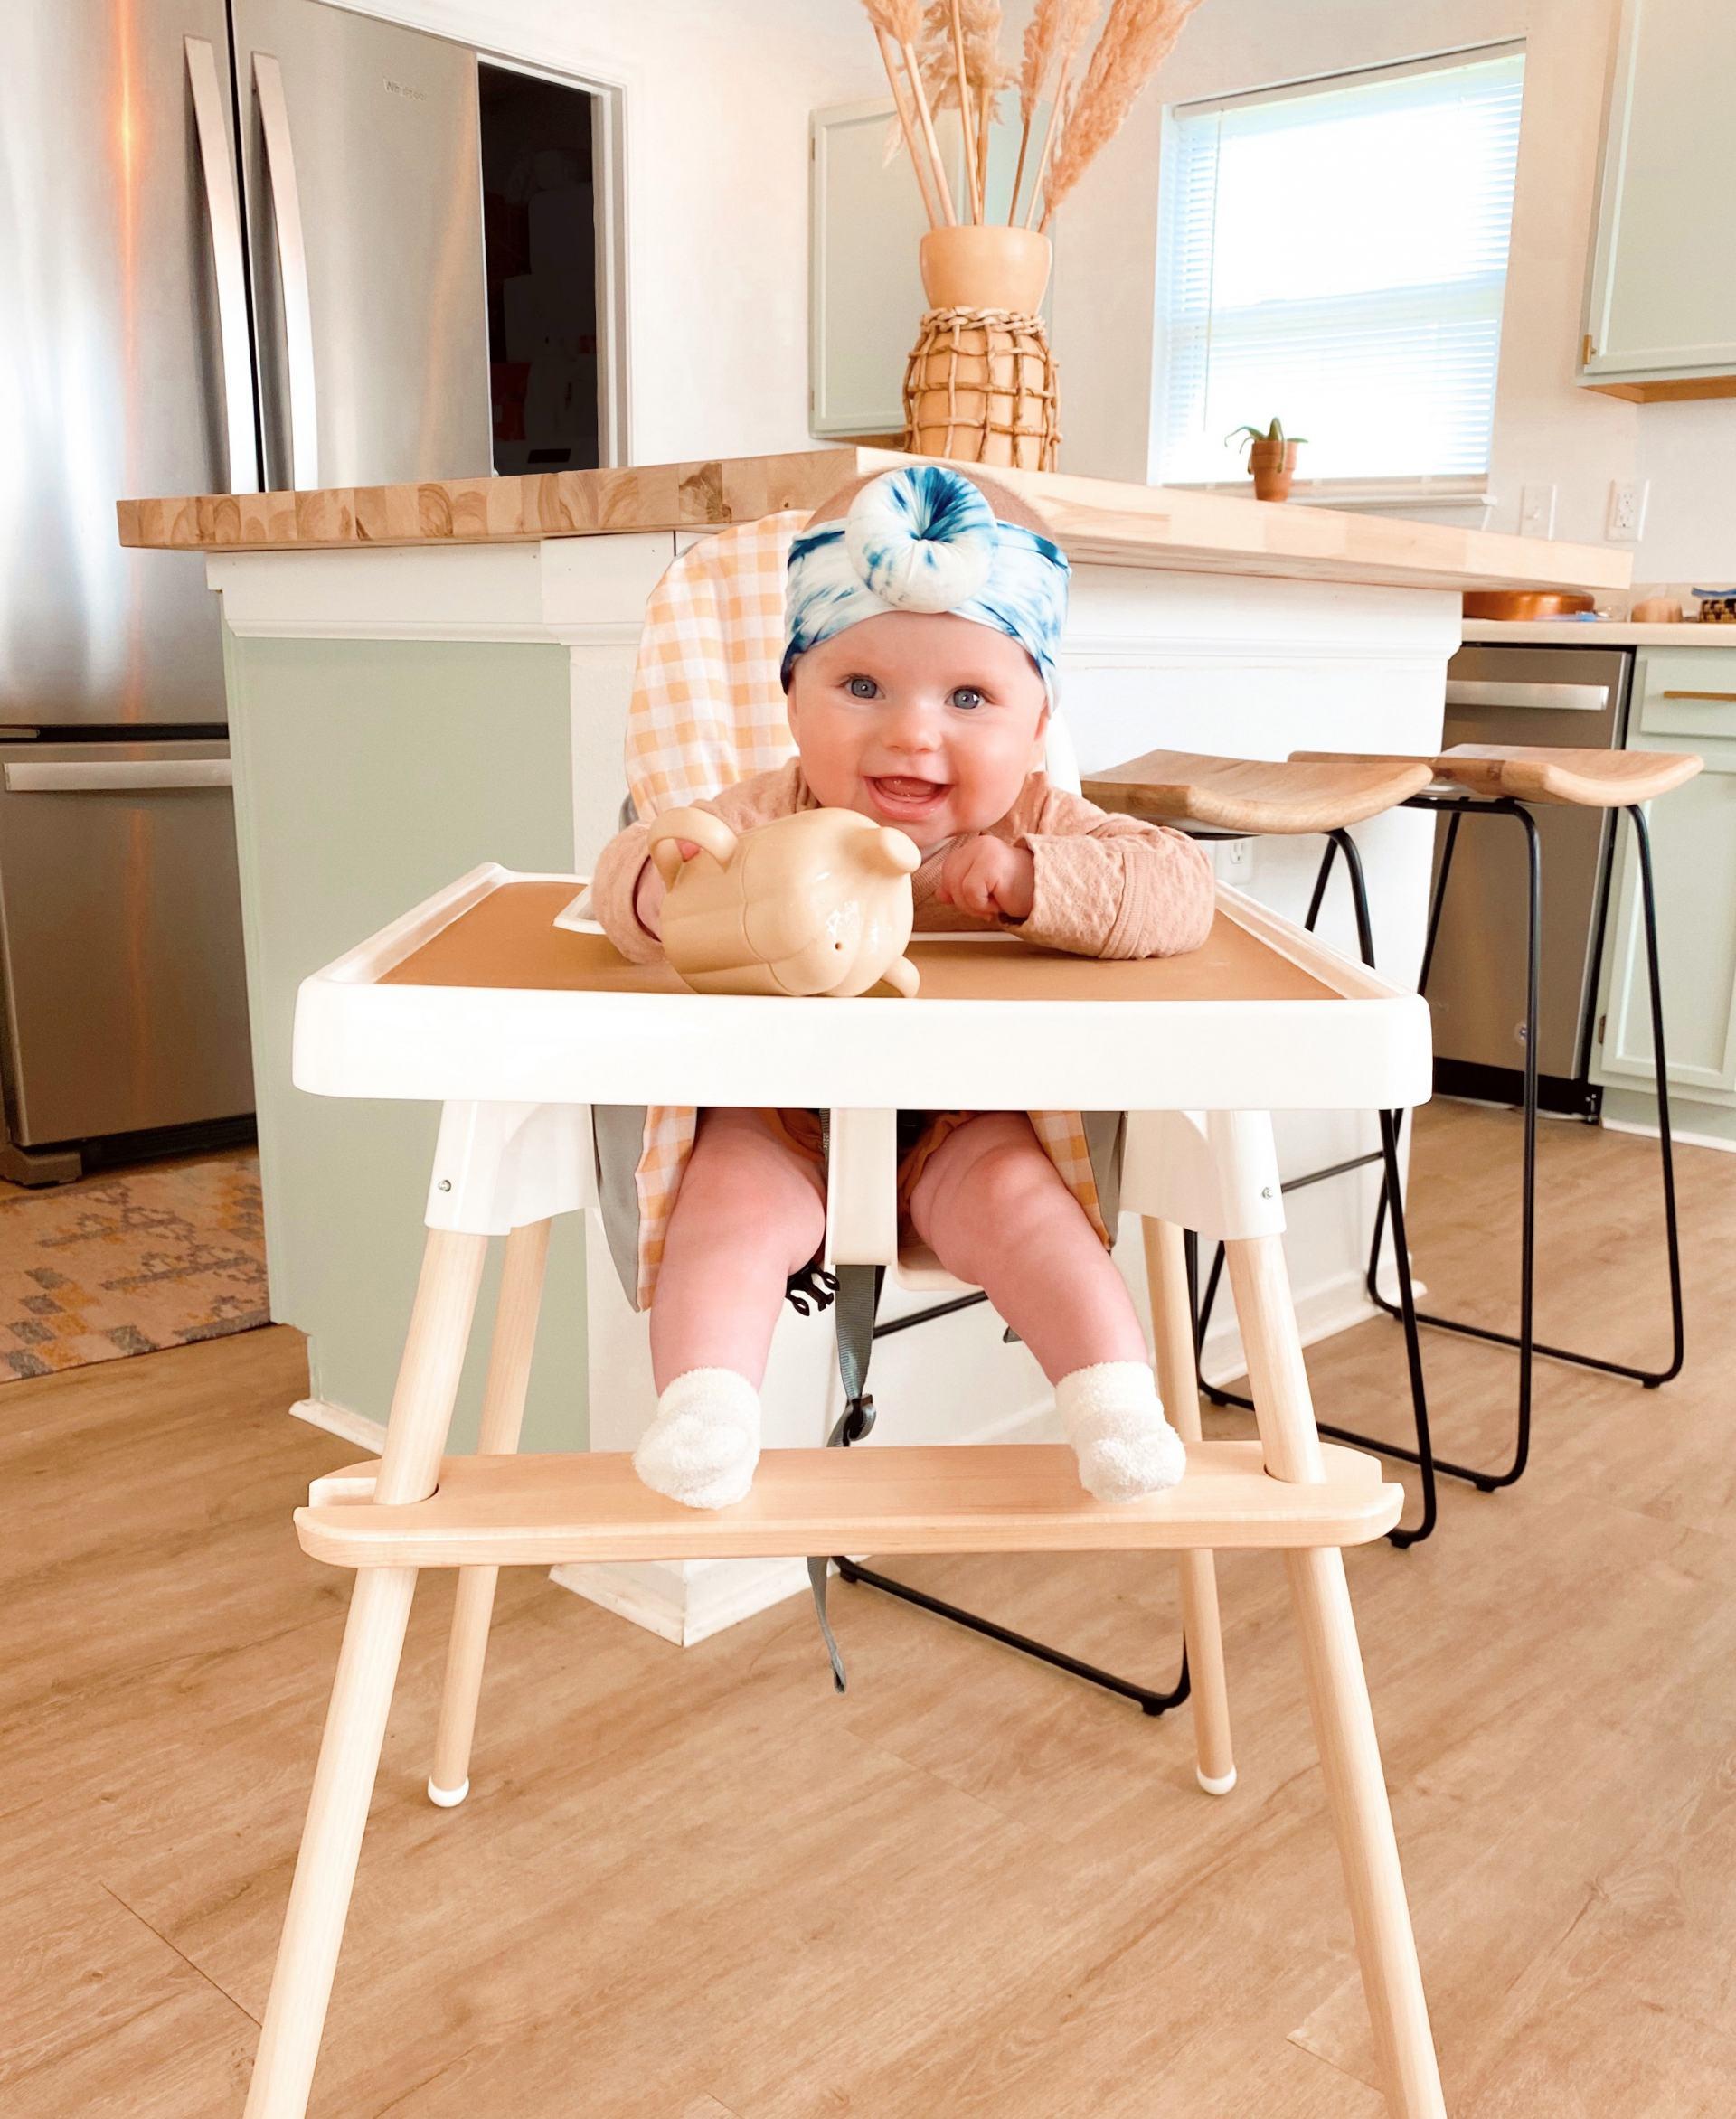 Why I Chose The Ikea Antilop High Chair With Yeah Baby Goods Accessories Abby Saylor Armbruster